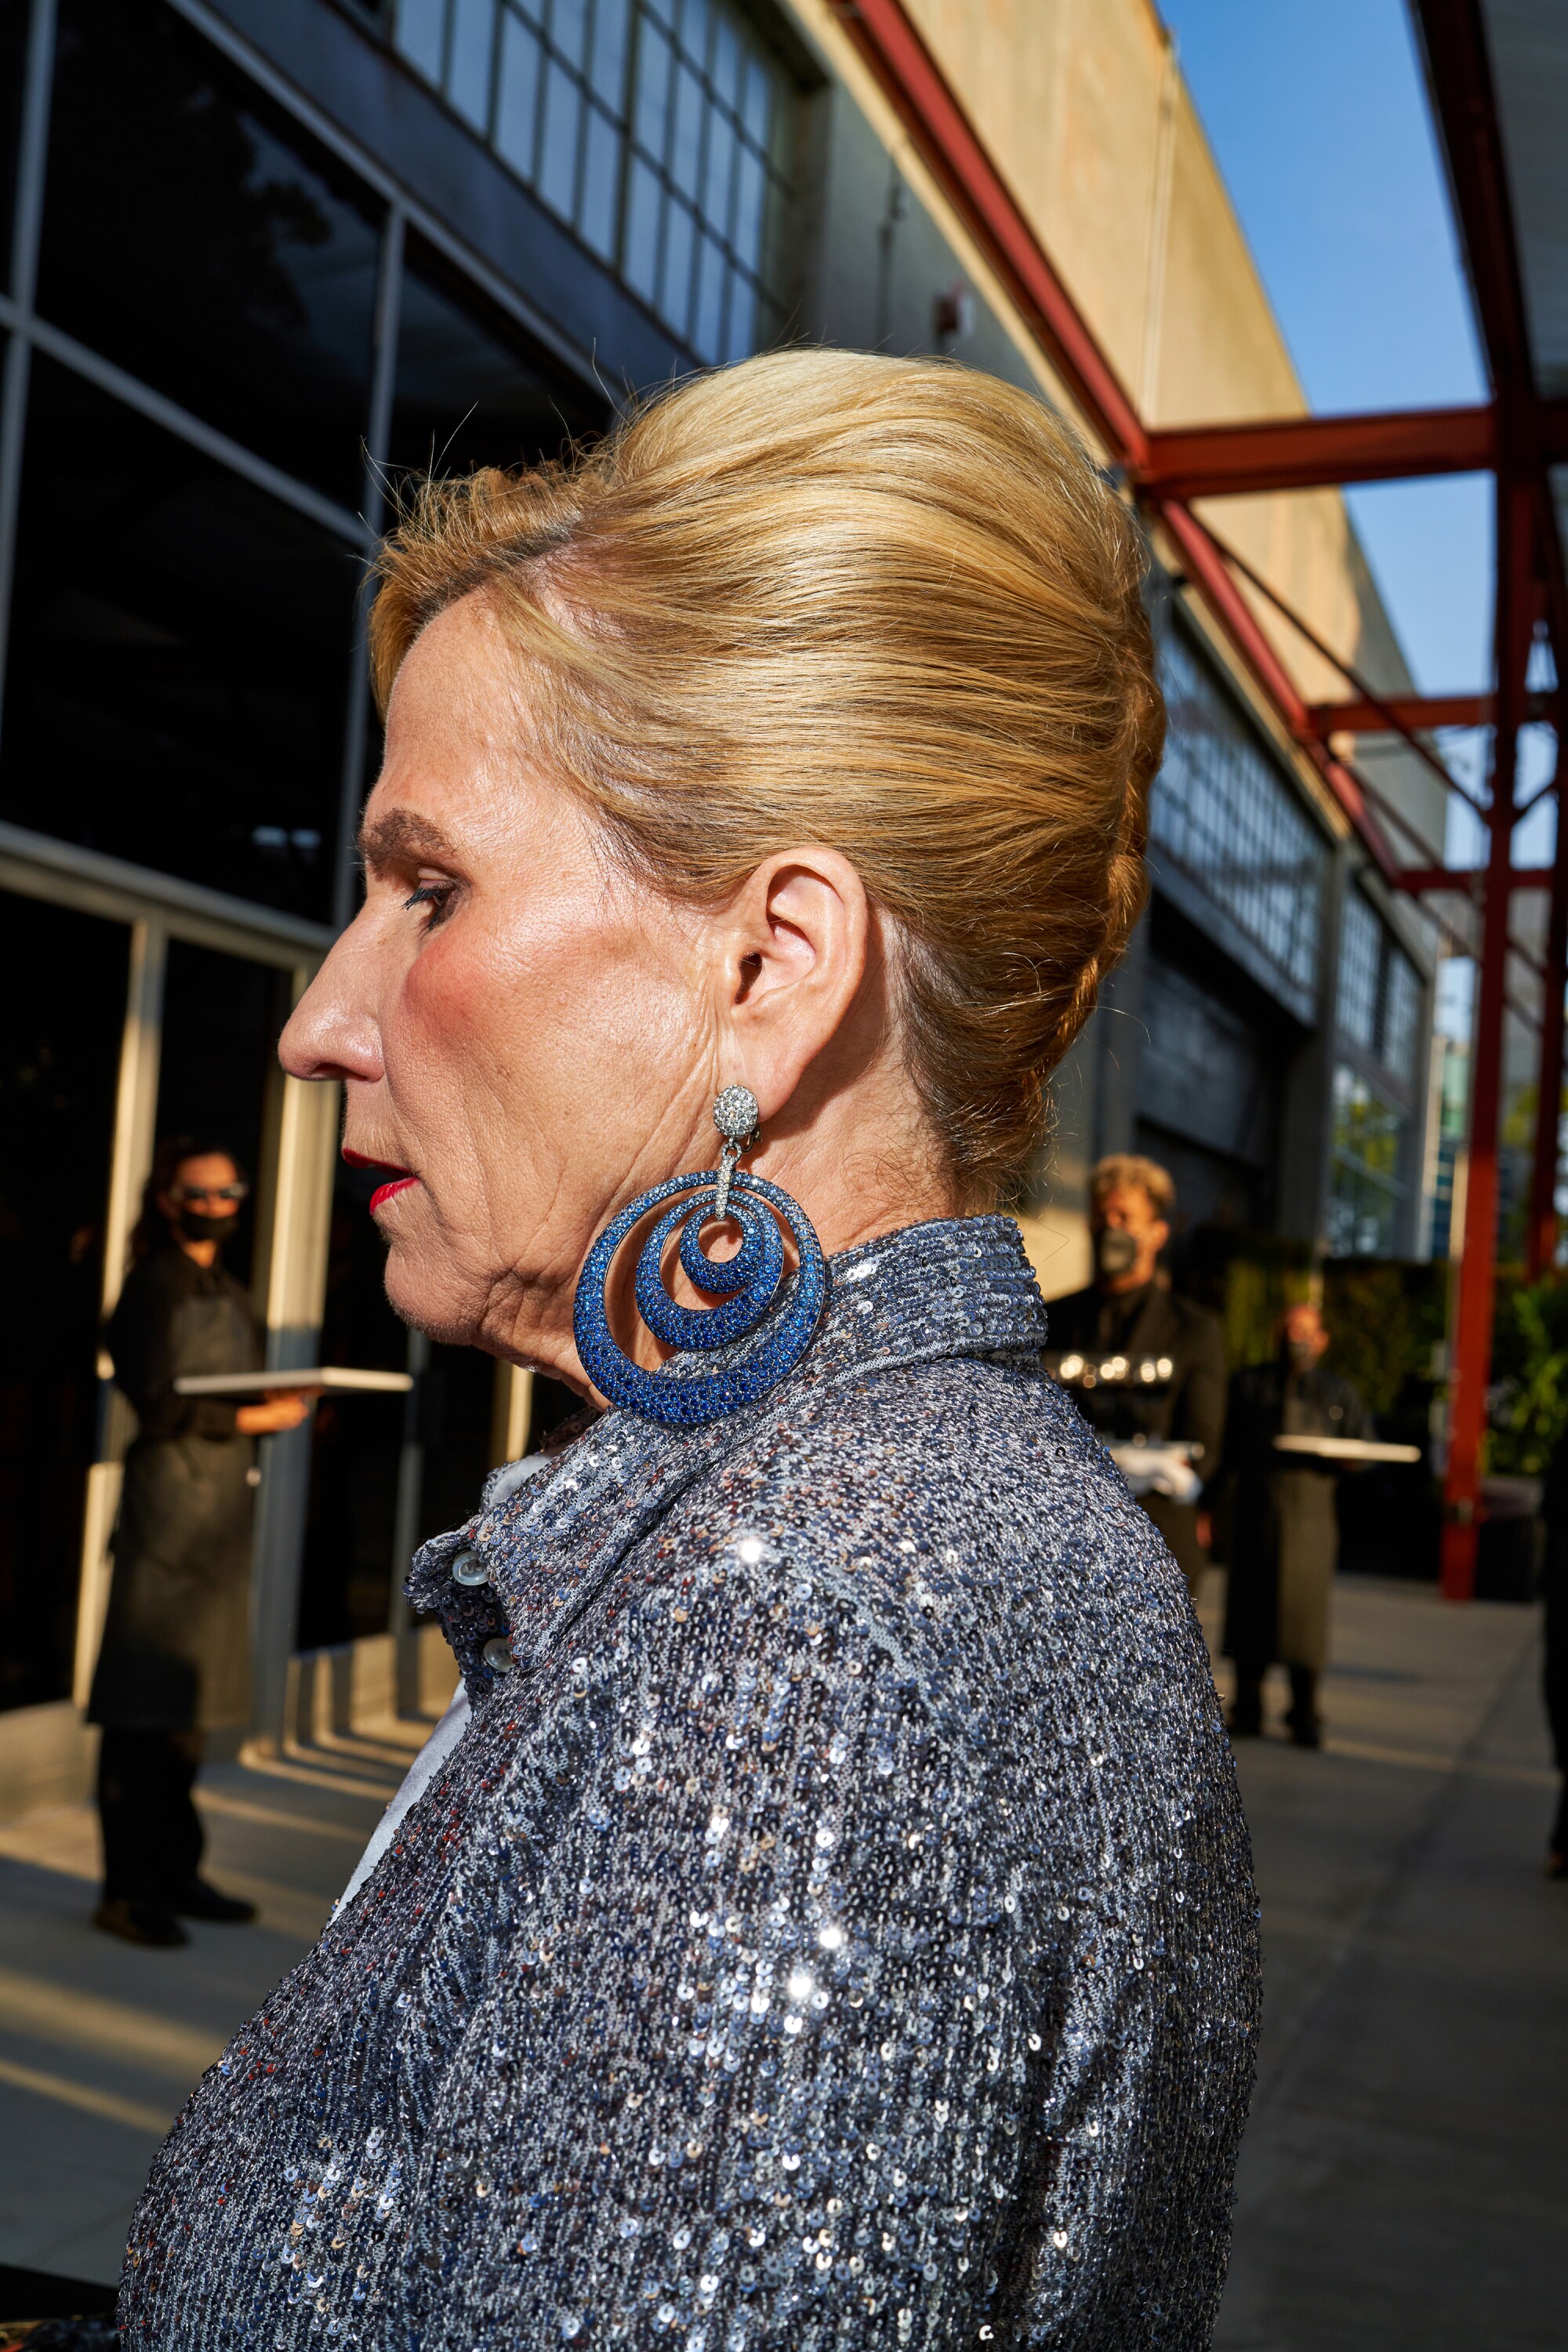 A woman with large blue earrings walks by.